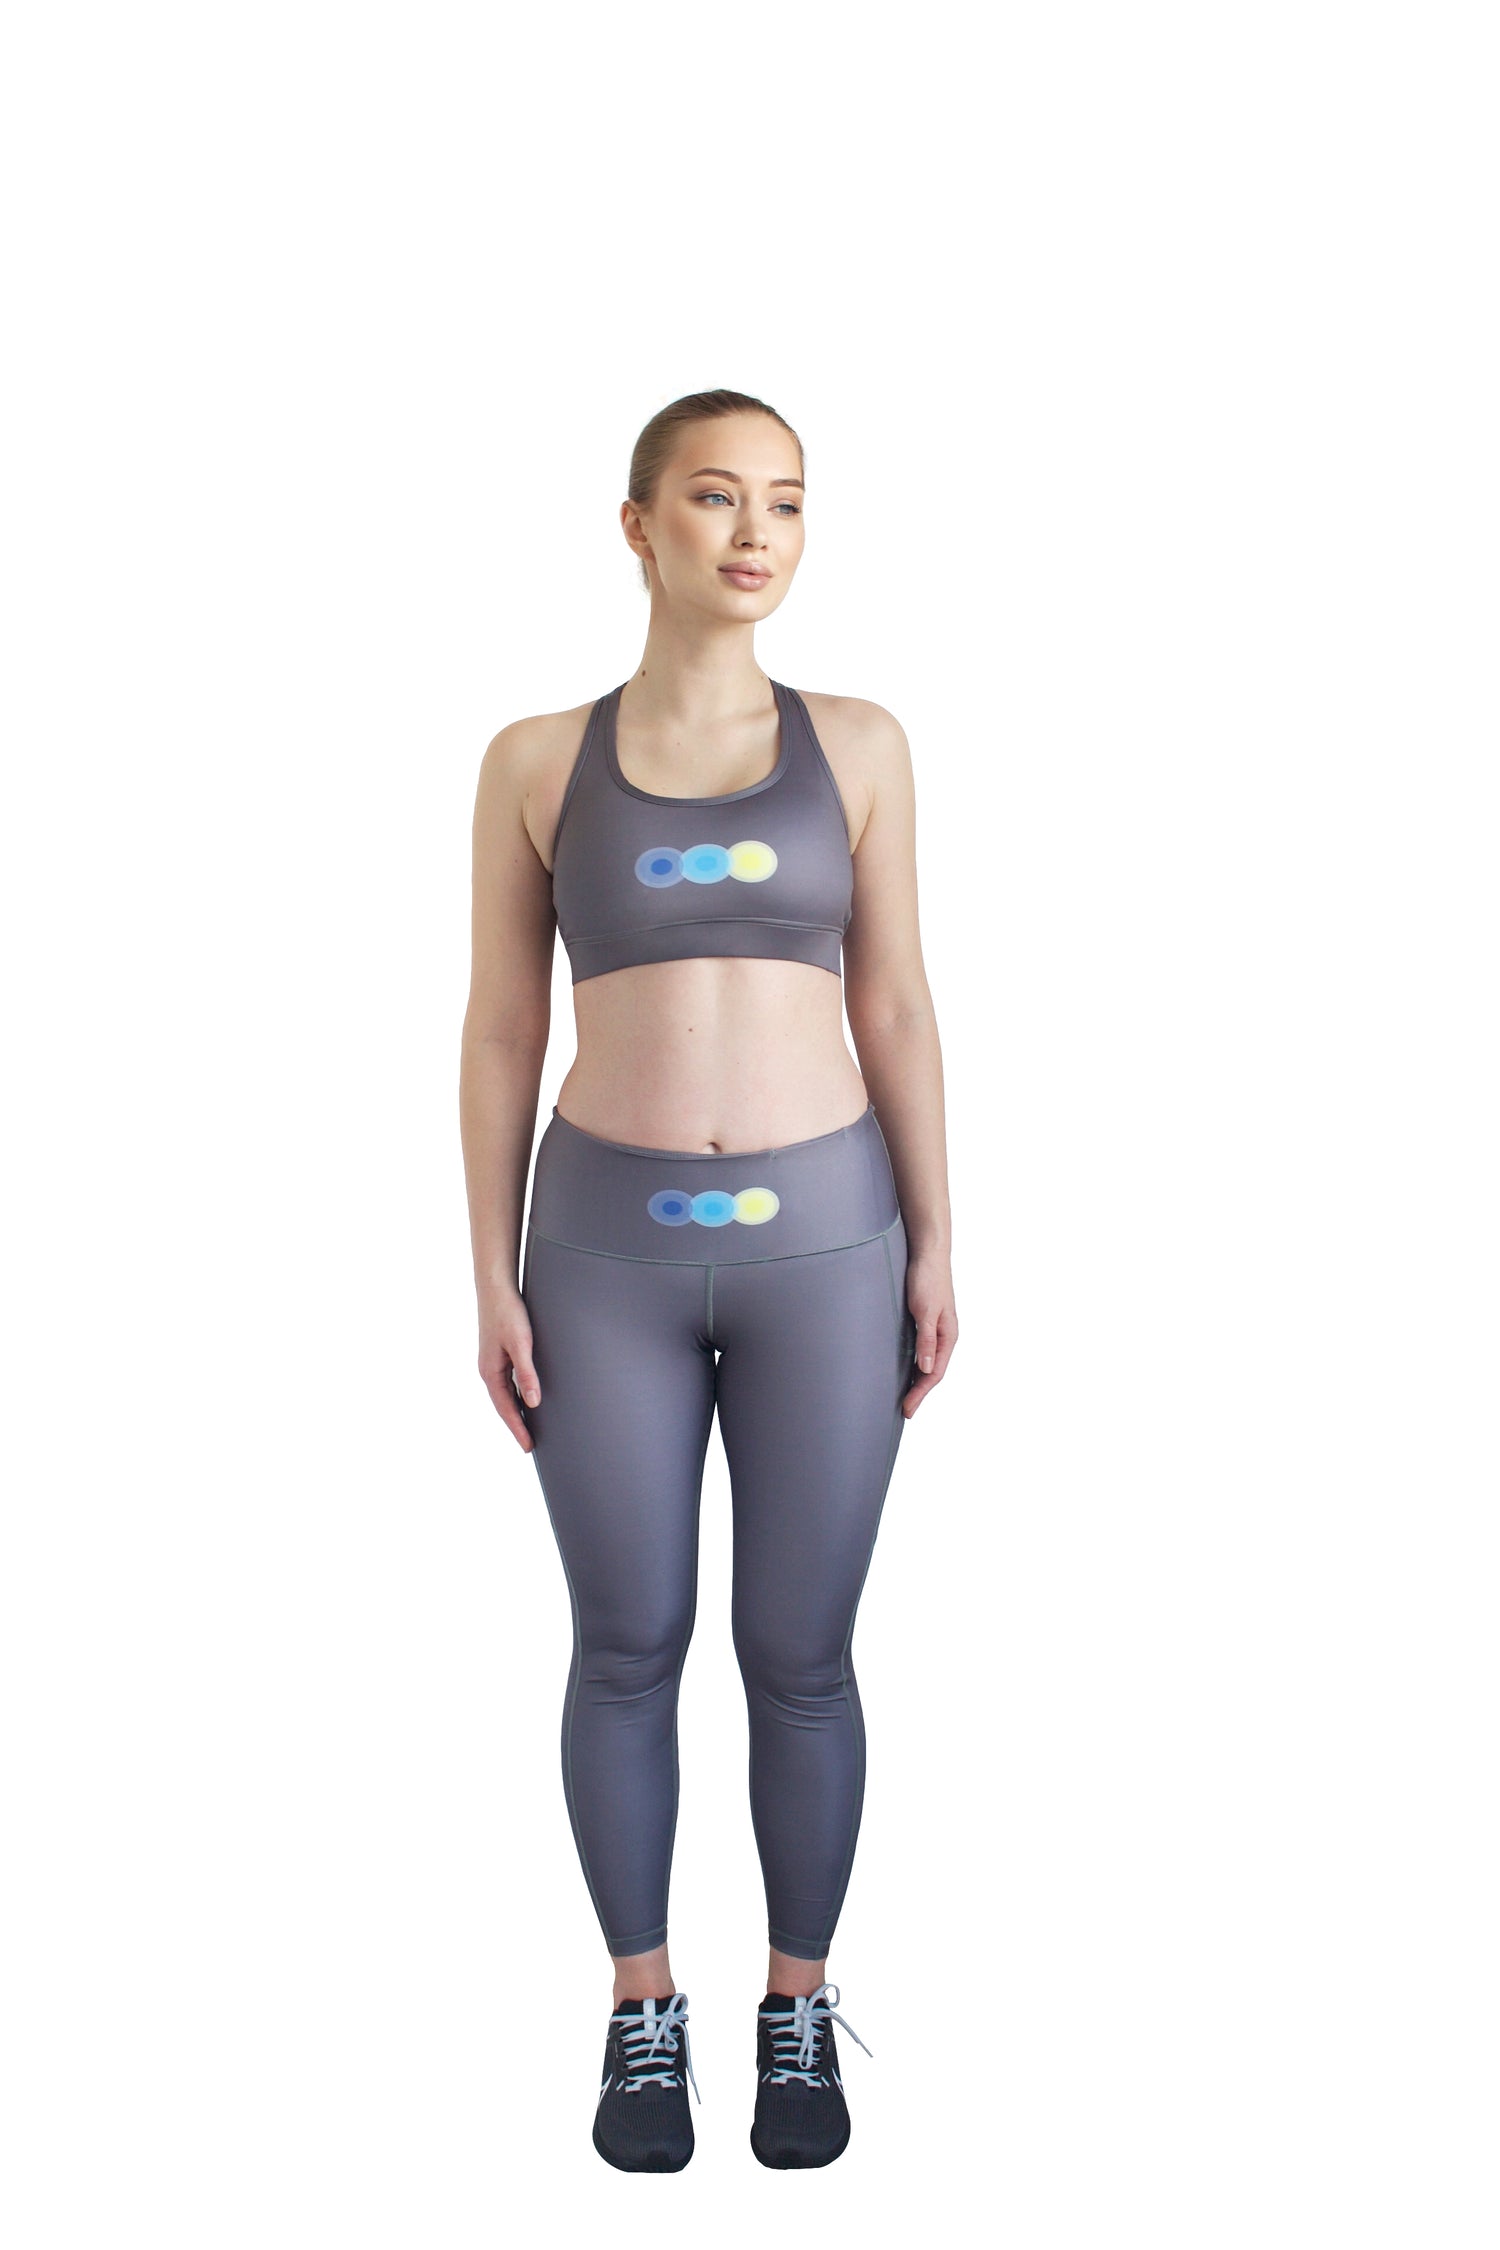 REGAL COUTURE ELEGANCE - Padded Sports Bra + High-Waisted Full-Length Leggings for Women with Medium Support and Convenient Pockets - Incredible Chic Collections™ LLC